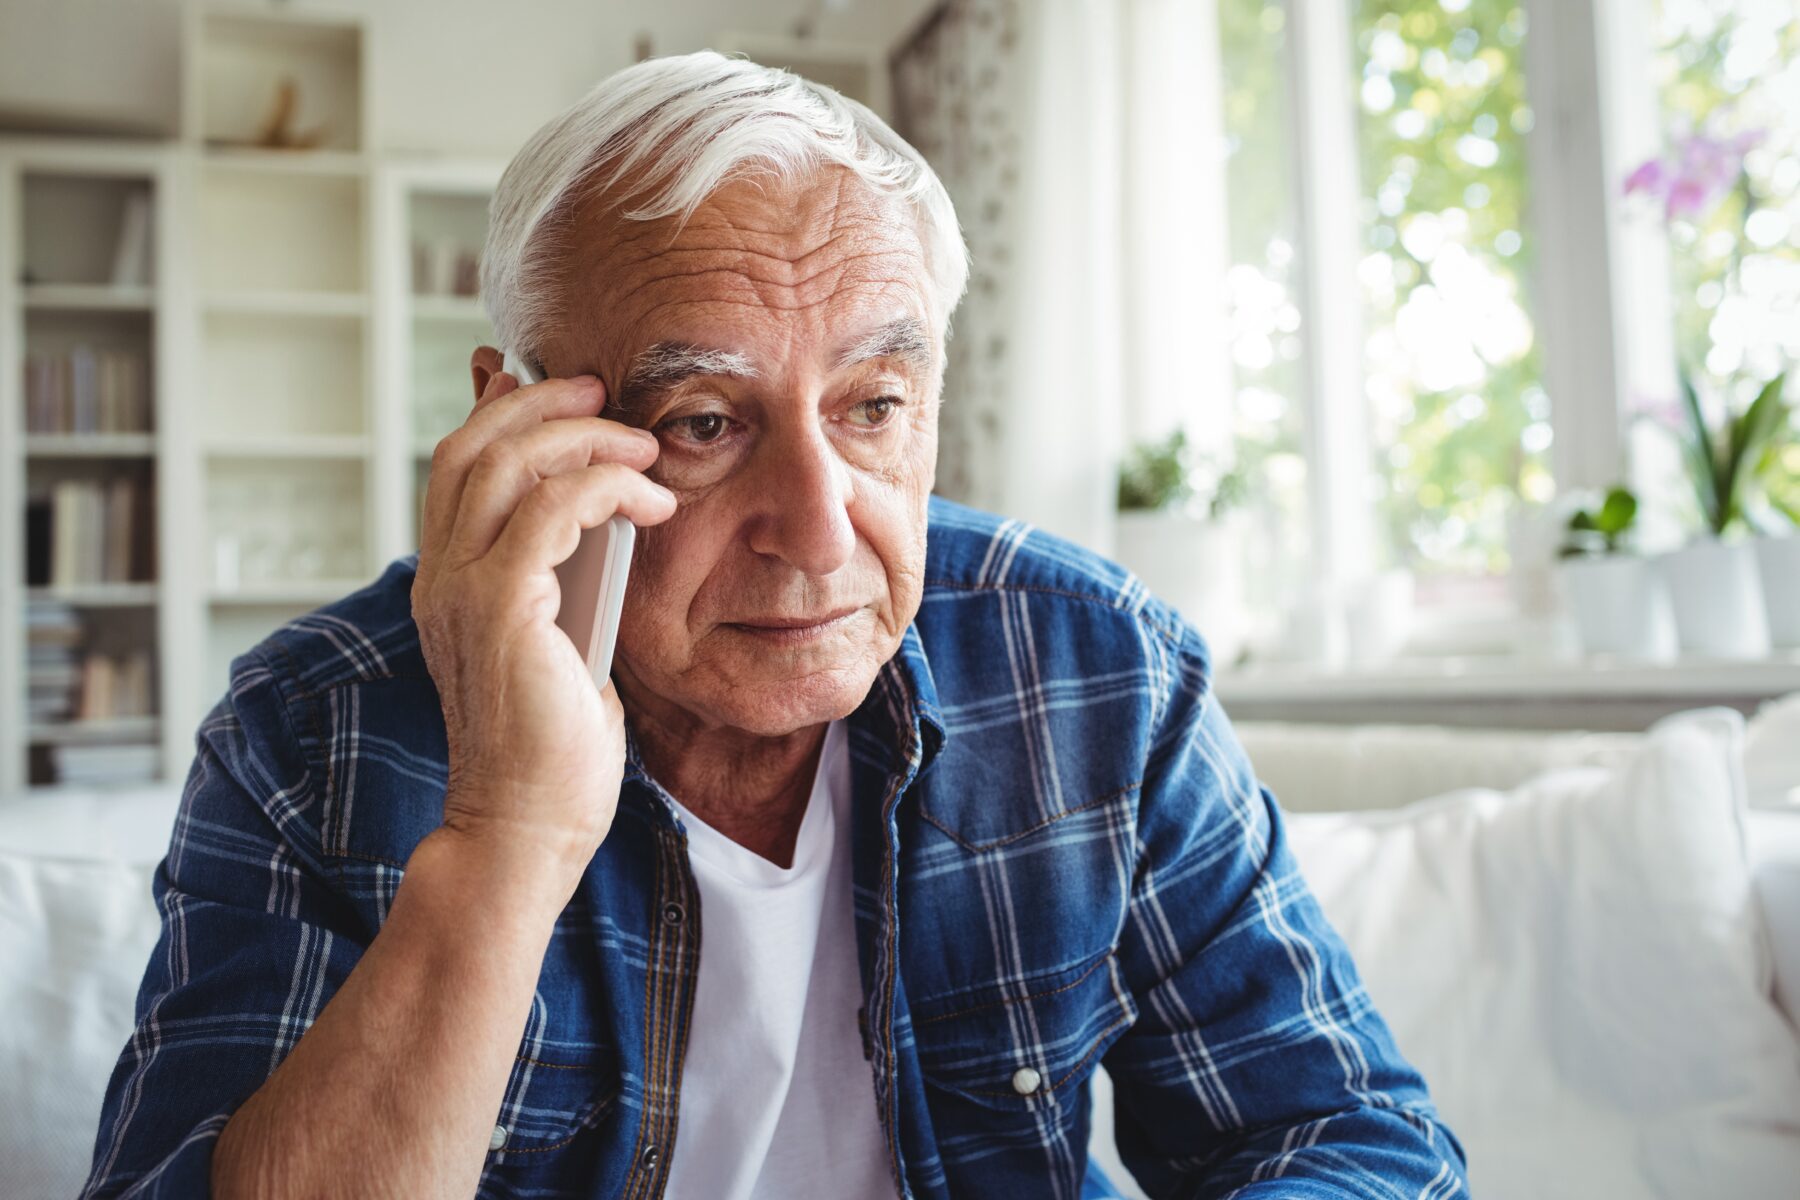 Tensed senior man talking on mobile phone about the early signs of bed bugs